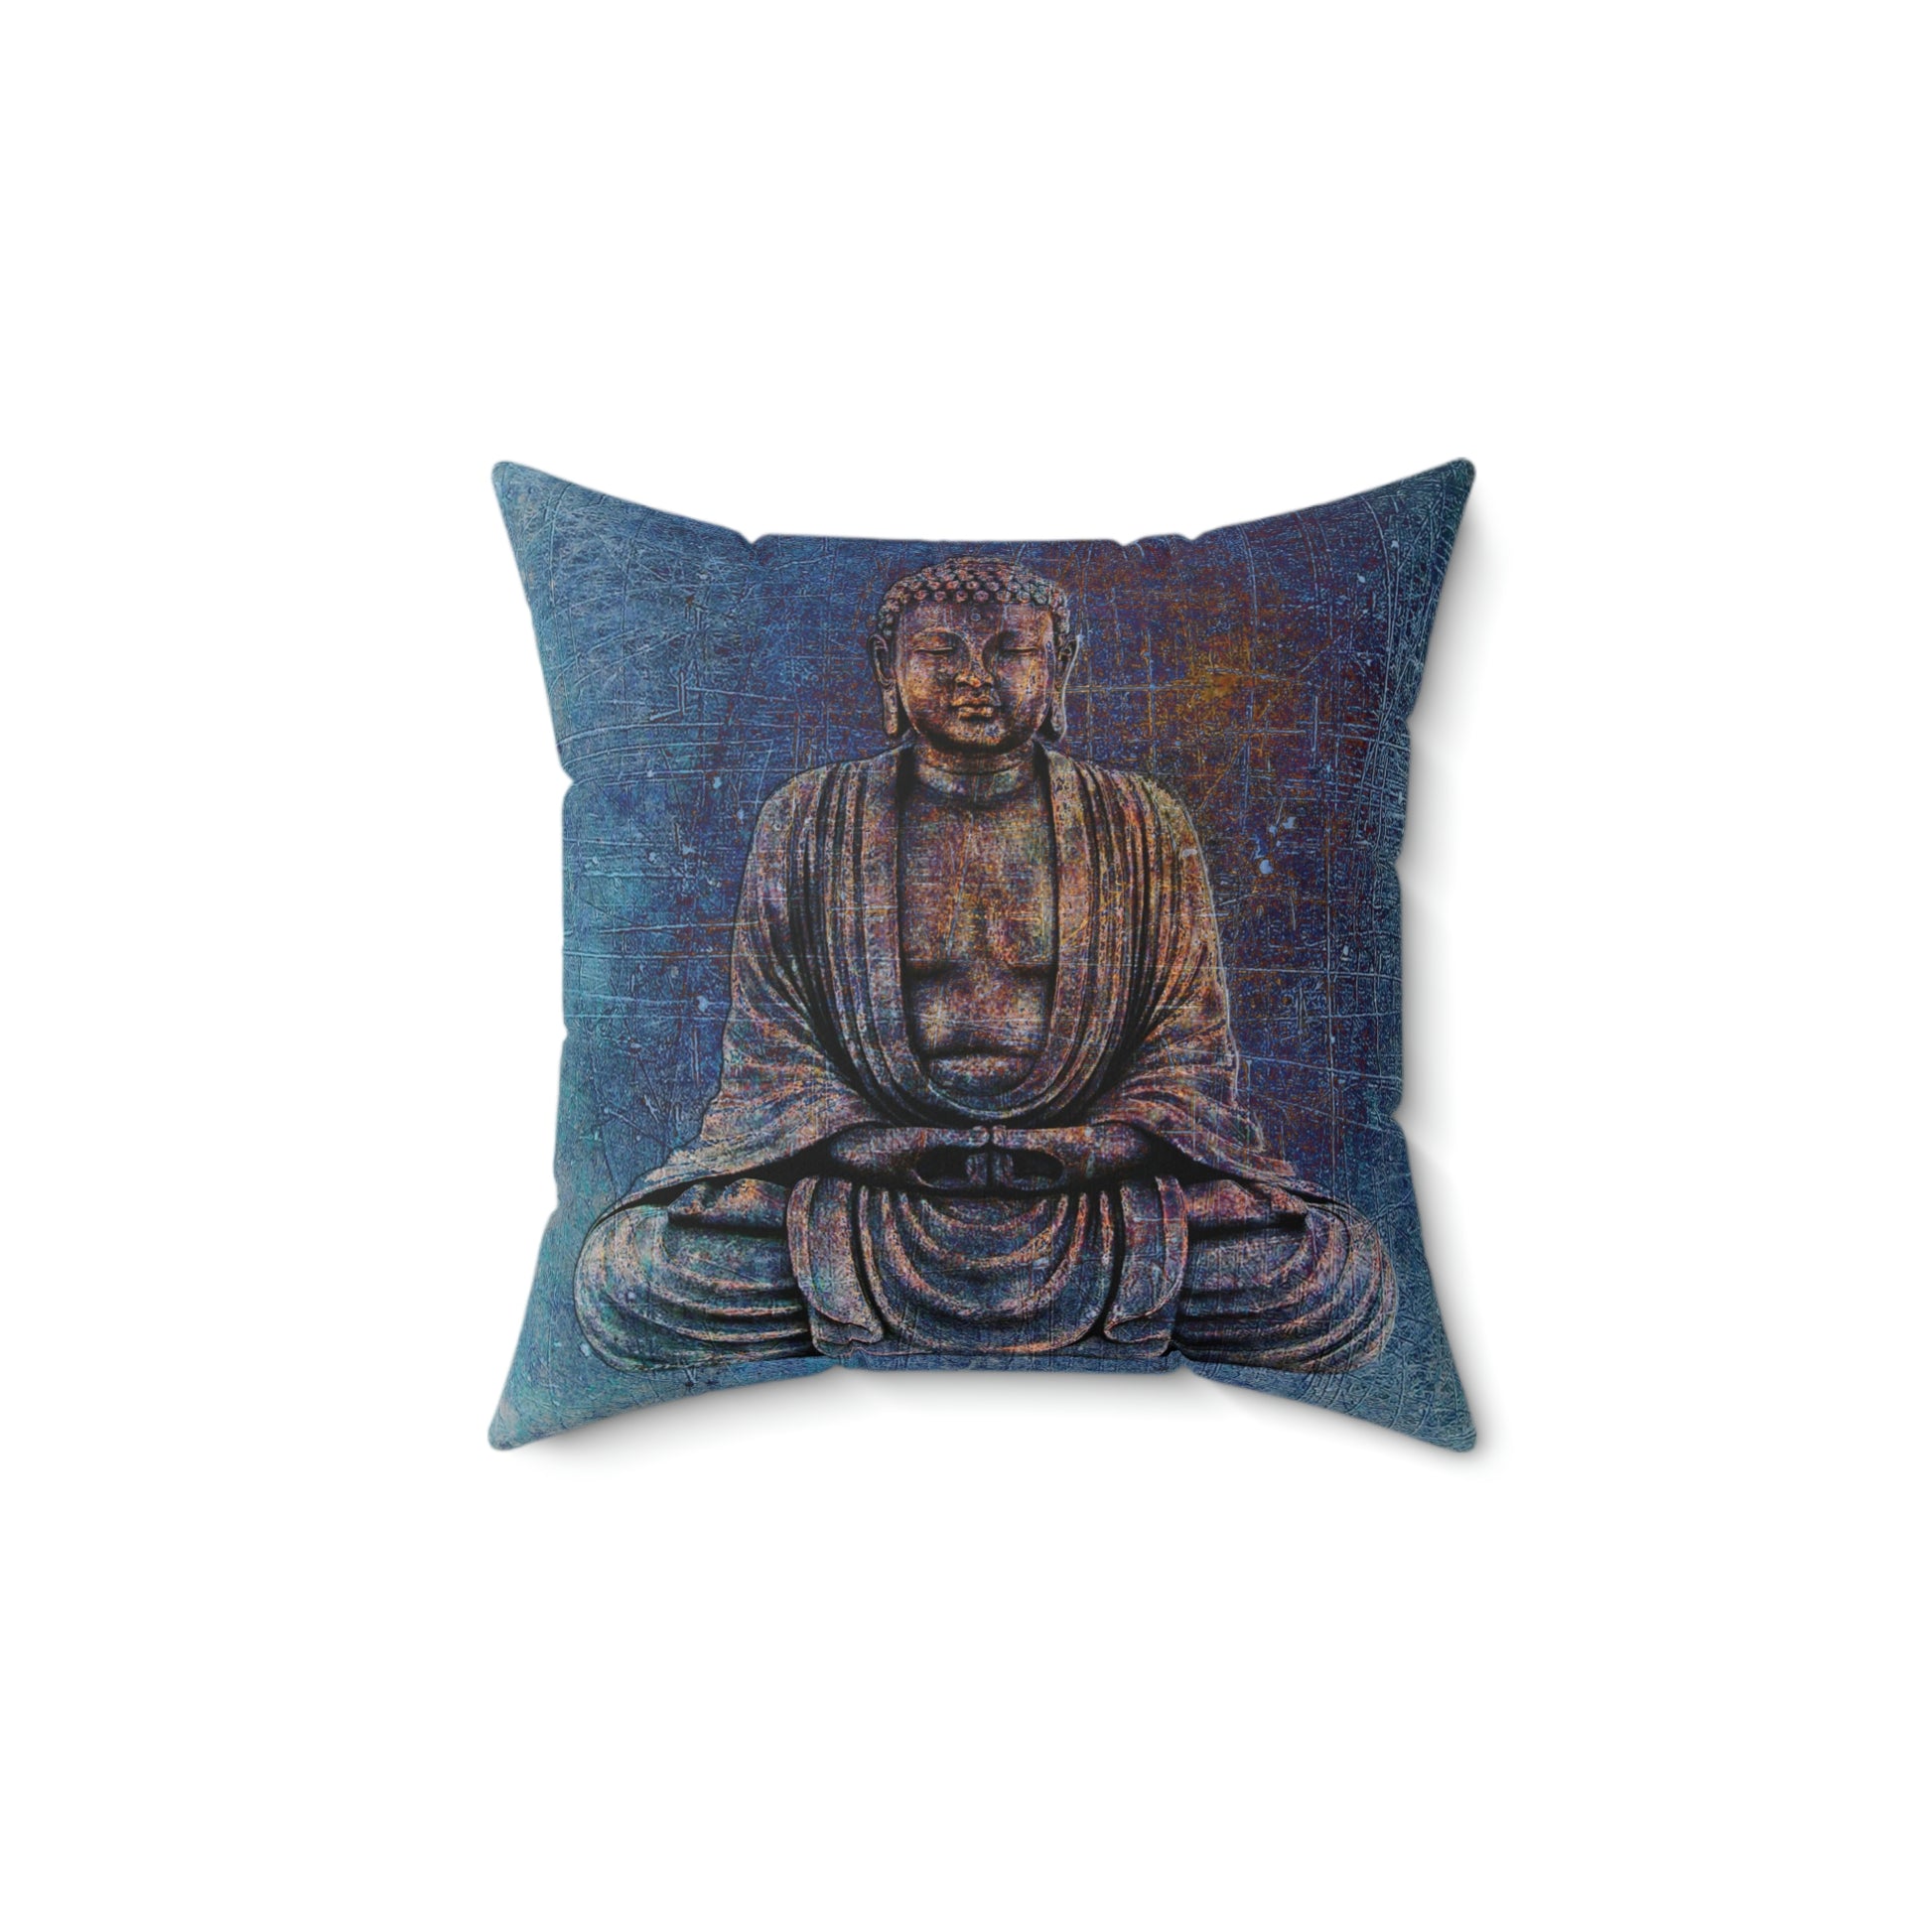 Sitting Buddha On Distressed Stone With Blue Hues Square Pillow 4 sizes available